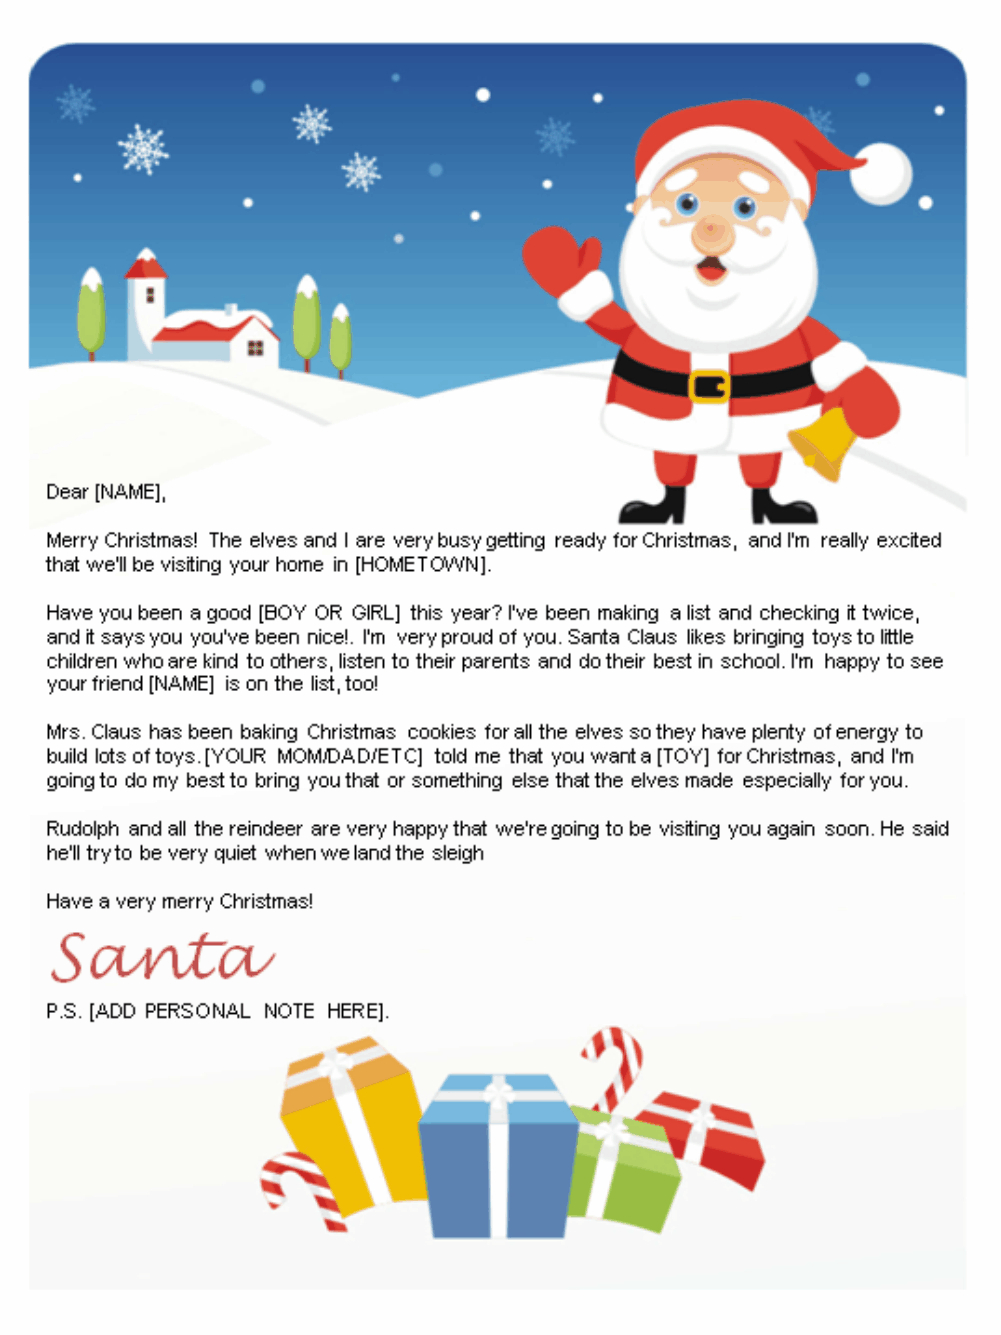 Free Letters From Santa | Santa Letters To Print At Home - Gifts - Free Printable Letter From Santa Template